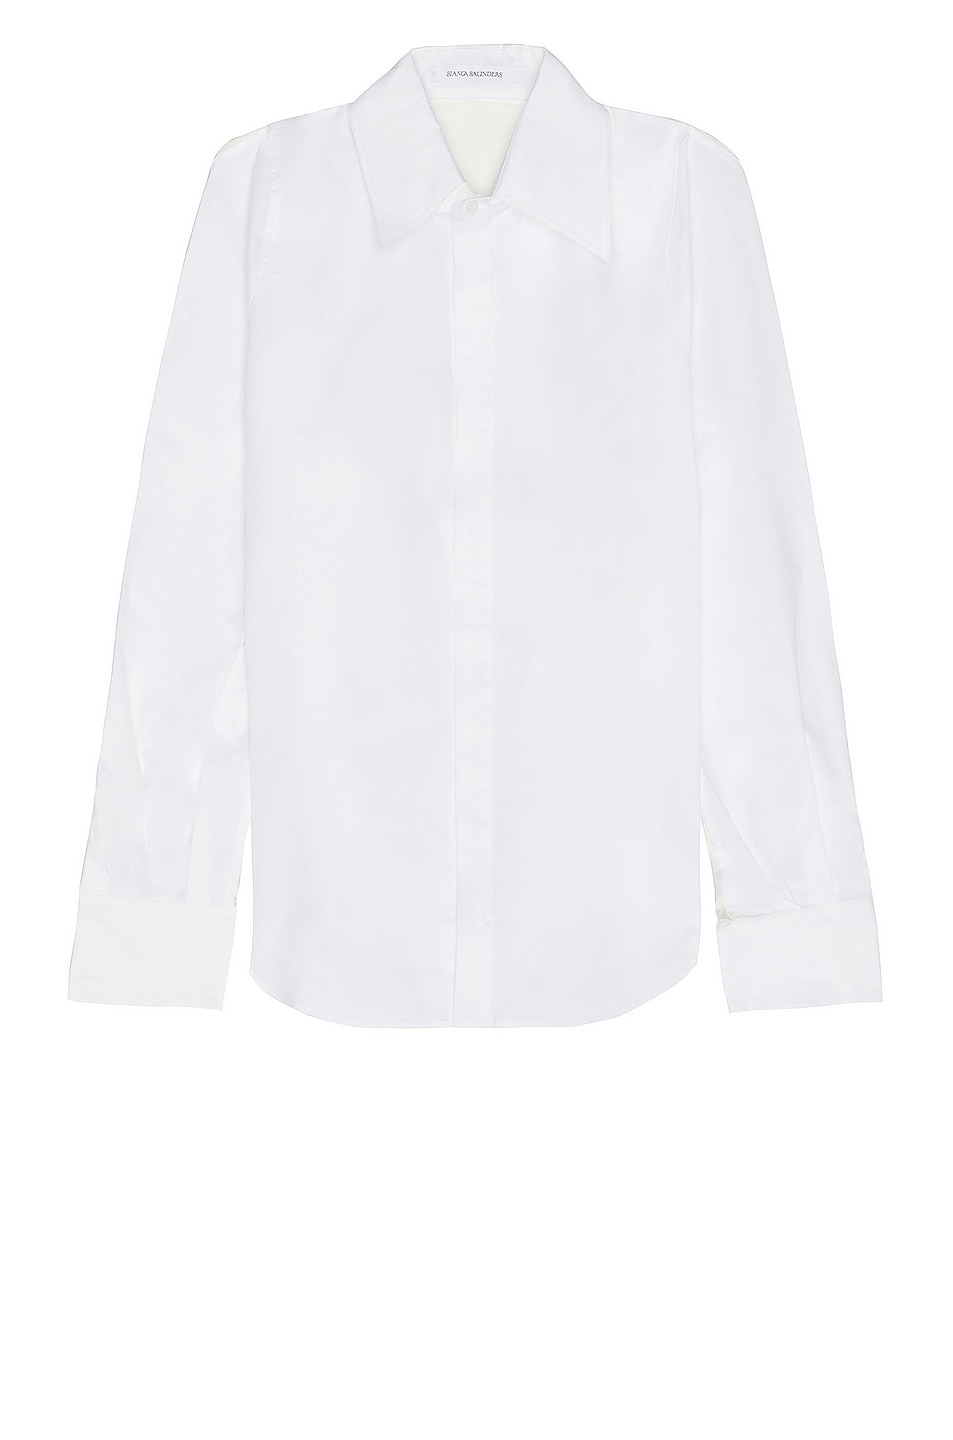 Image 1 of Bianca Saunders Row Back Shirt in White